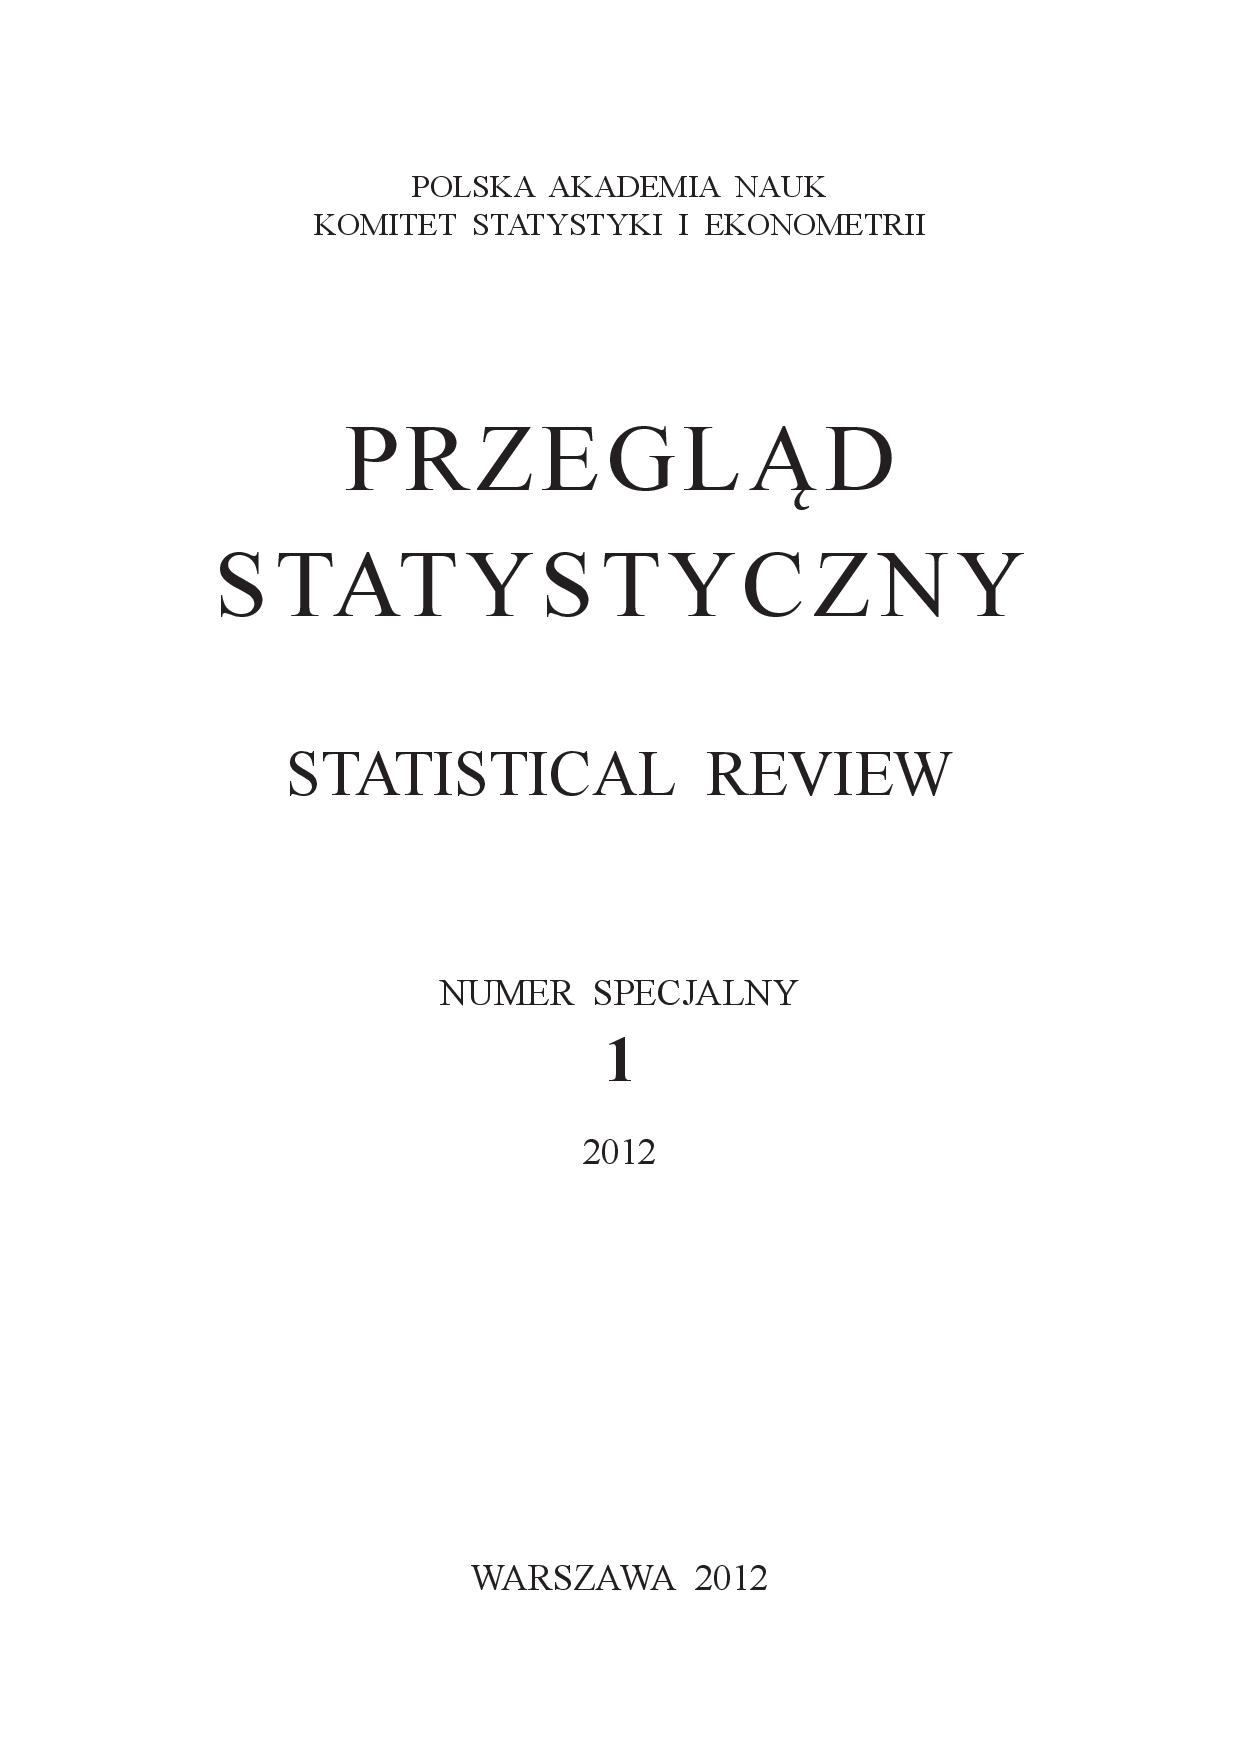 Using indirect estimation with spatial autocorrelation in social surveys in Poland Cover Image